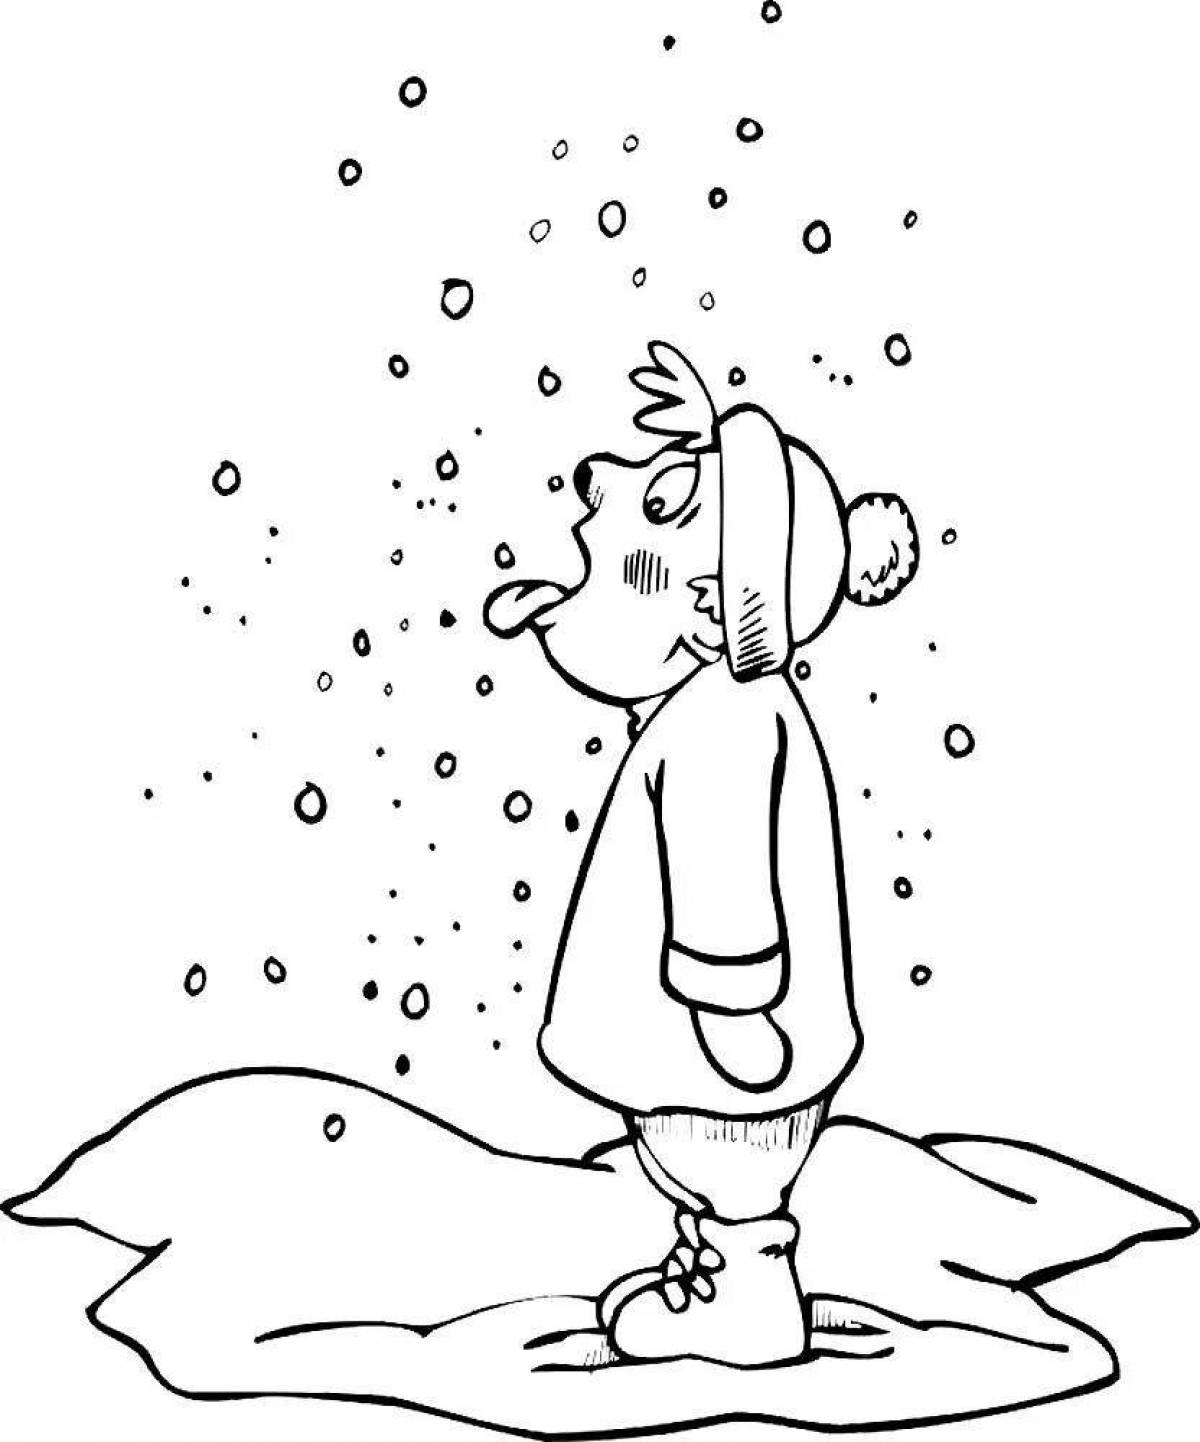 Color-explosion winter safety coloring page for preschoolers